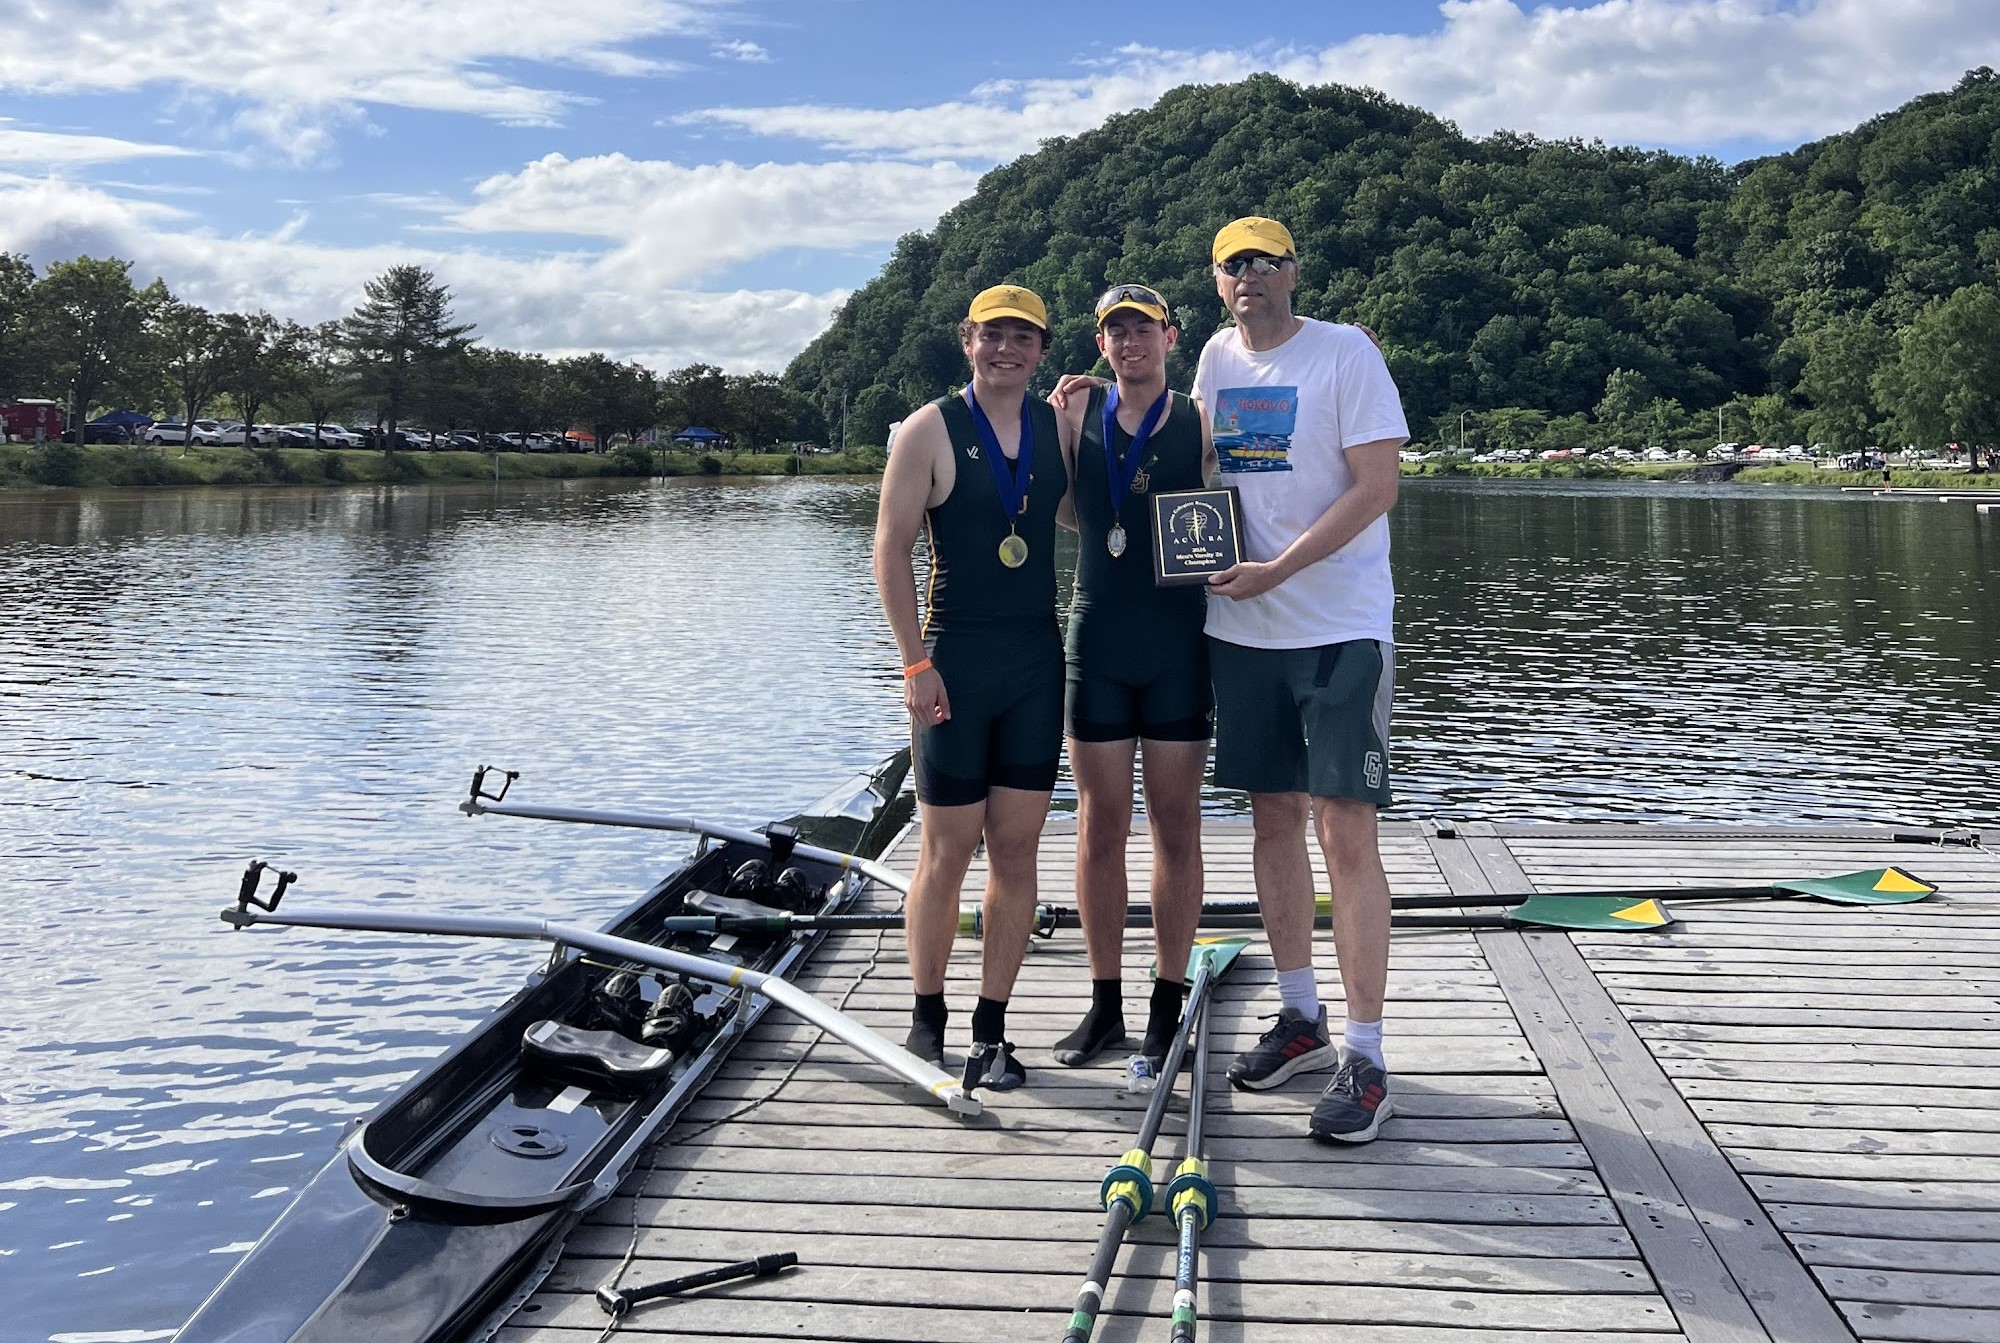 two crew athletes pose for a photo with their coach on a dock with their boat in the water next to them